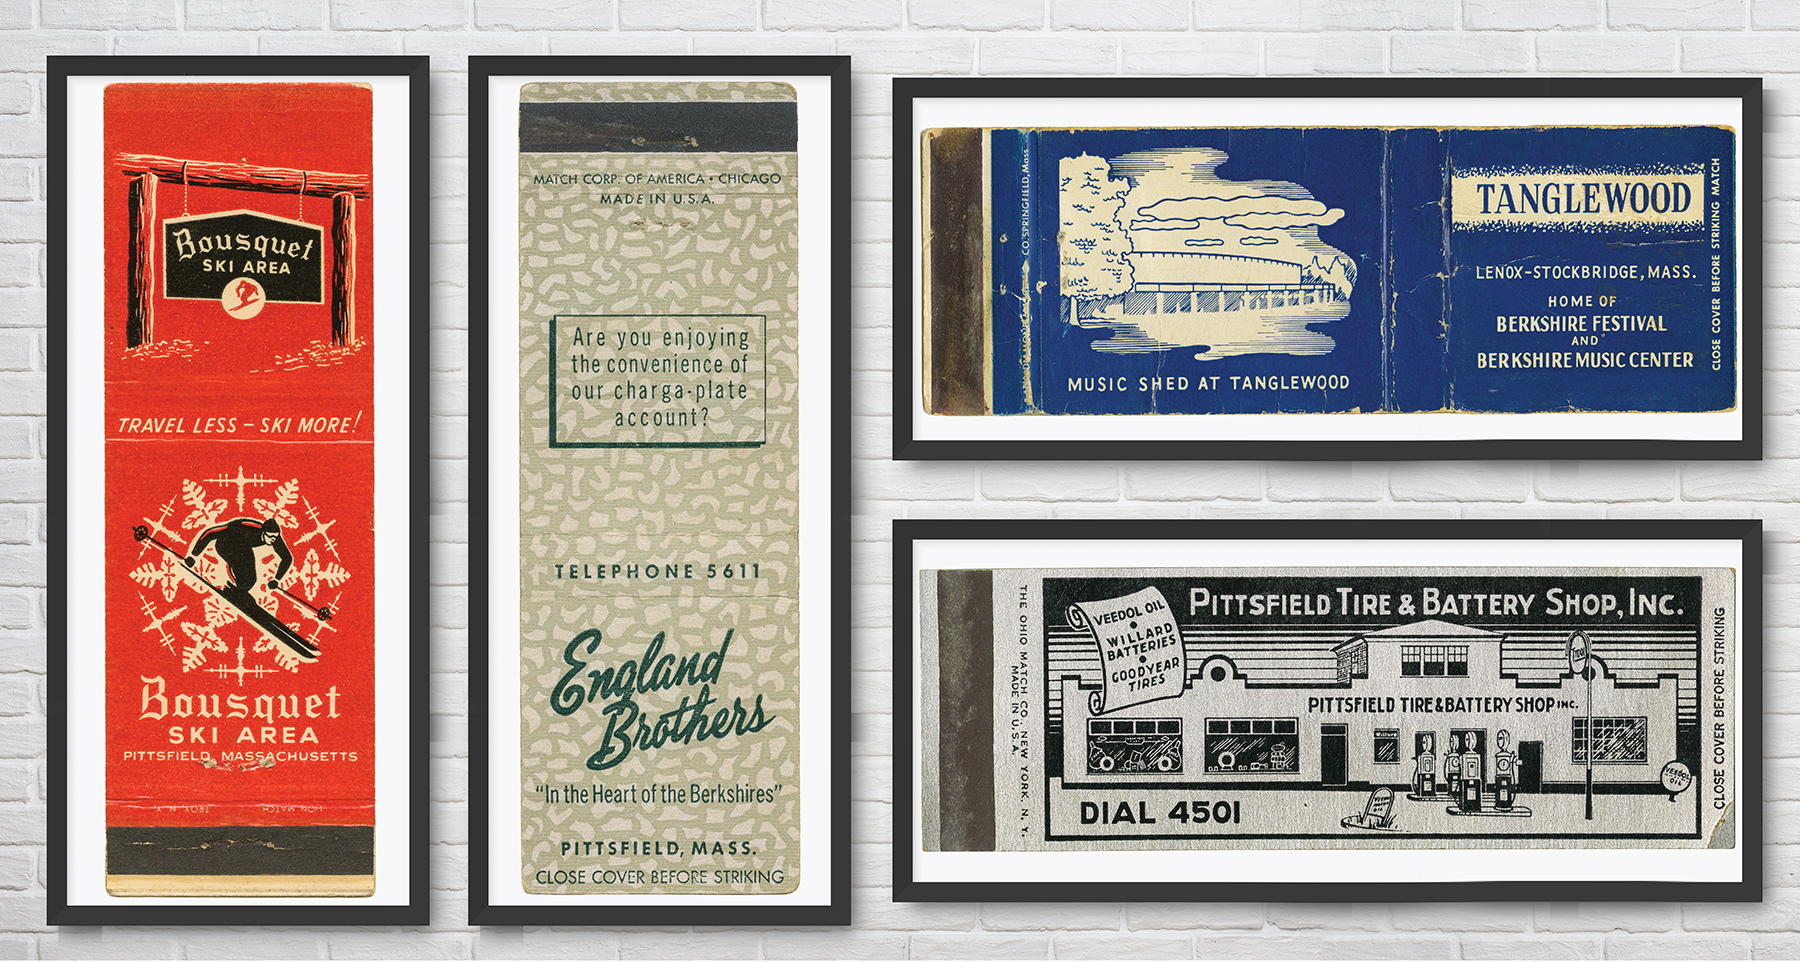 Marchetti Headquarters, at 314 North Street, will feature Strike a Memory Imagery & Illustration in Berkshire Matchbooks, an art exhibit of vintage Berkshire matchbooks dating from the 1950s-1980s for the month of September.